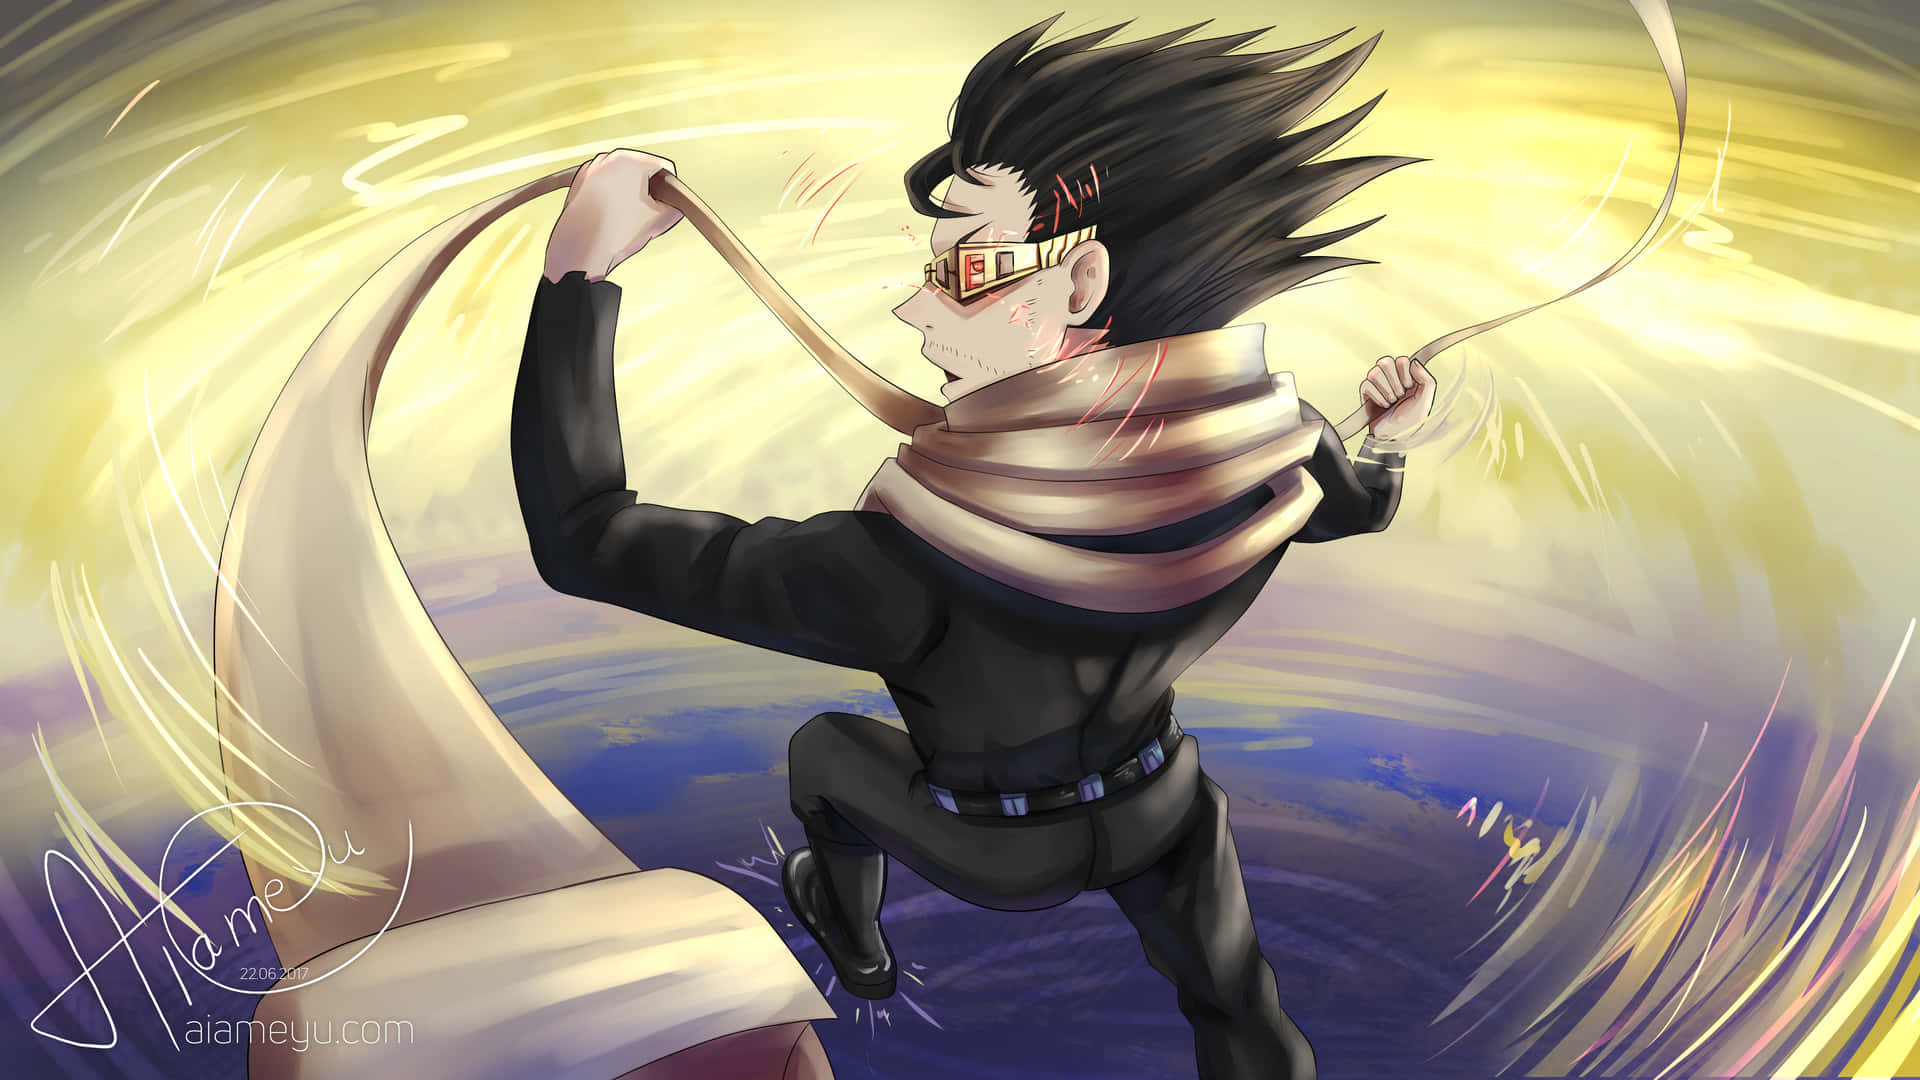 Get Ready For The Exam With Shota Aizawa! Wallpaper